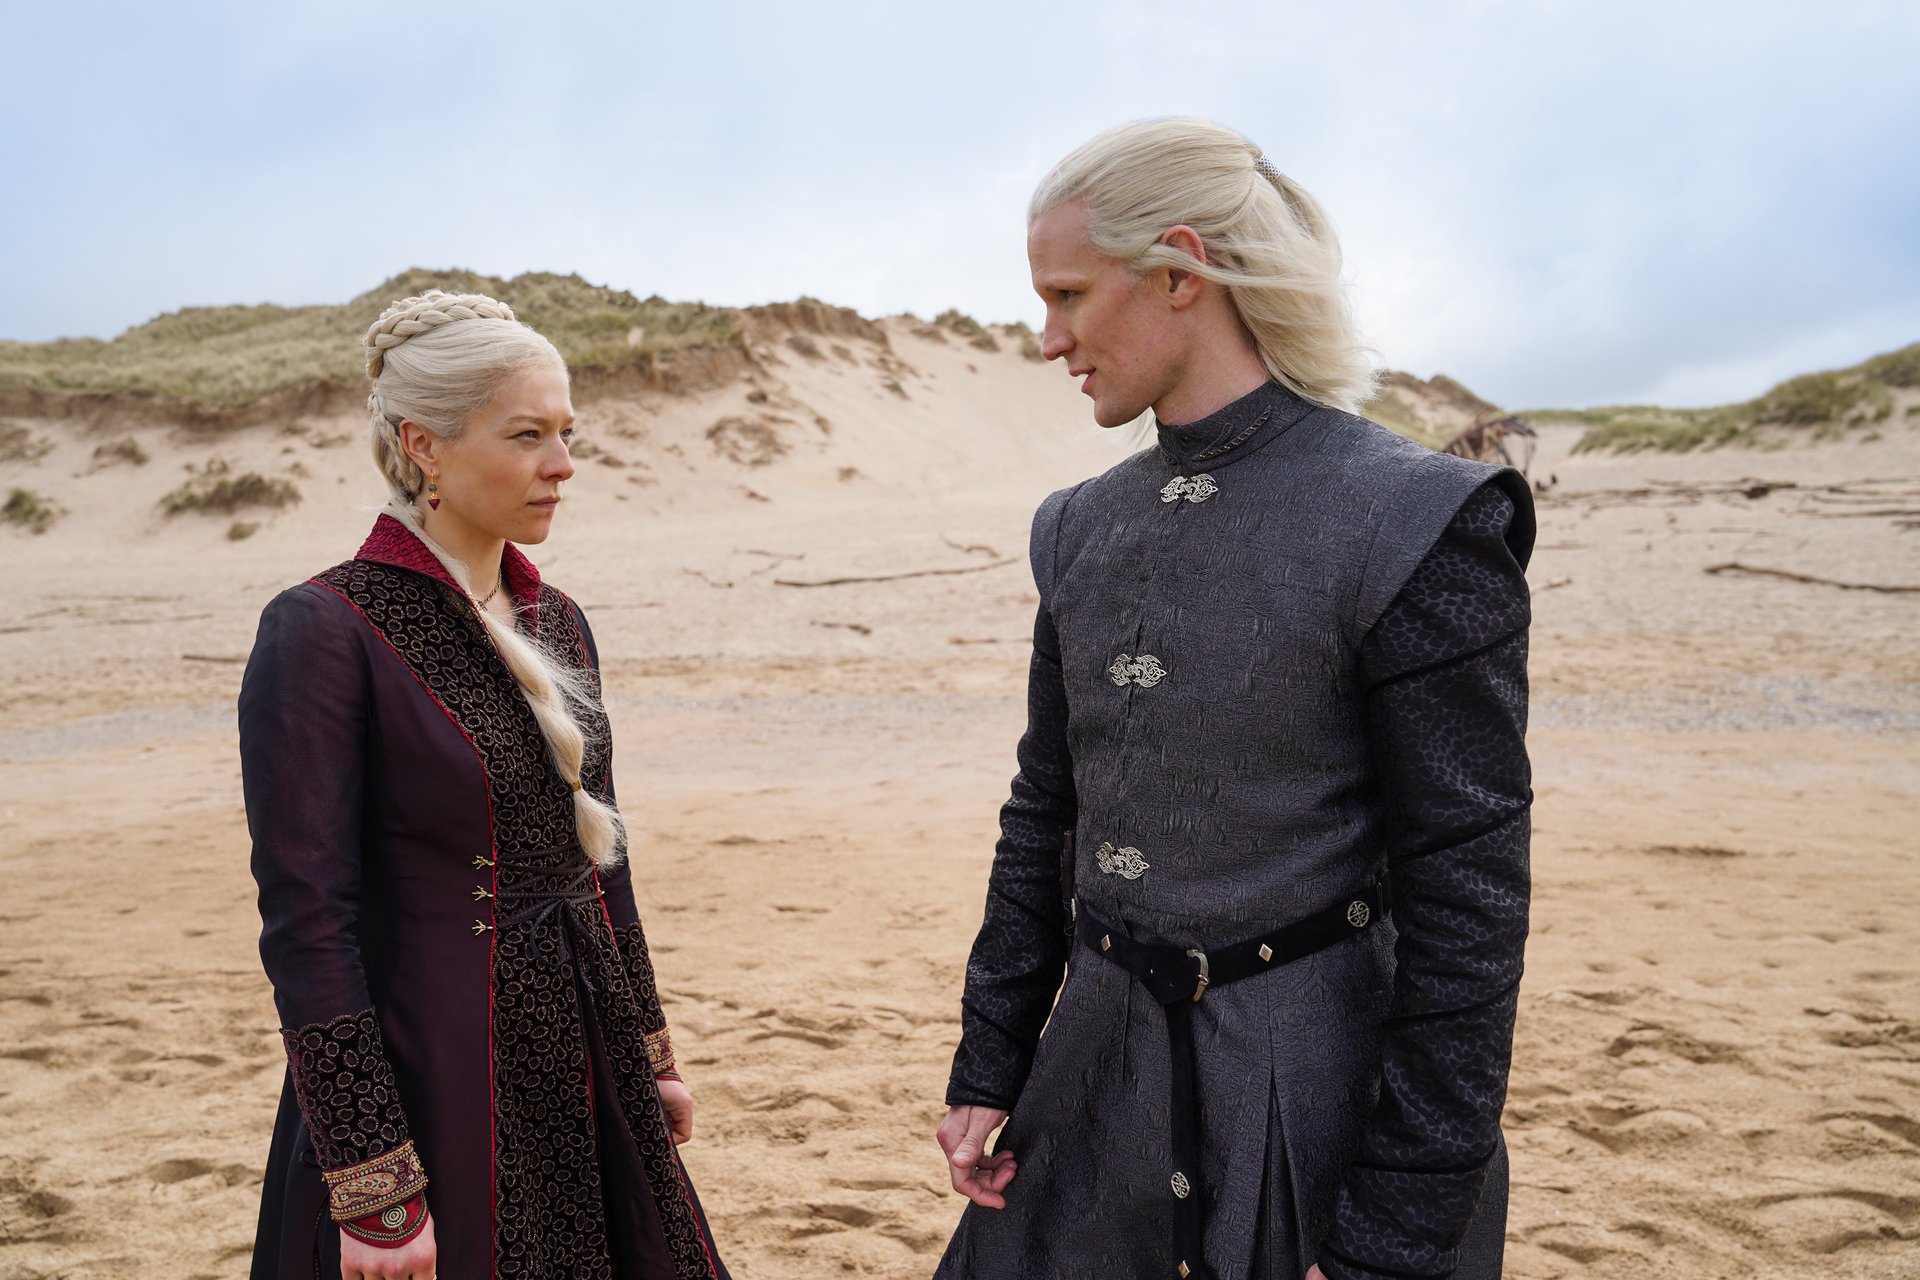 Emma D’Arcy as Princess Rhaenyra Targaryen and Matt Smith as Prince Daemon Targaryen in 'Game of Thrones' prequel 'House of the Dragon.' They're staring at one another, and there's sand and a blue sky behind them.